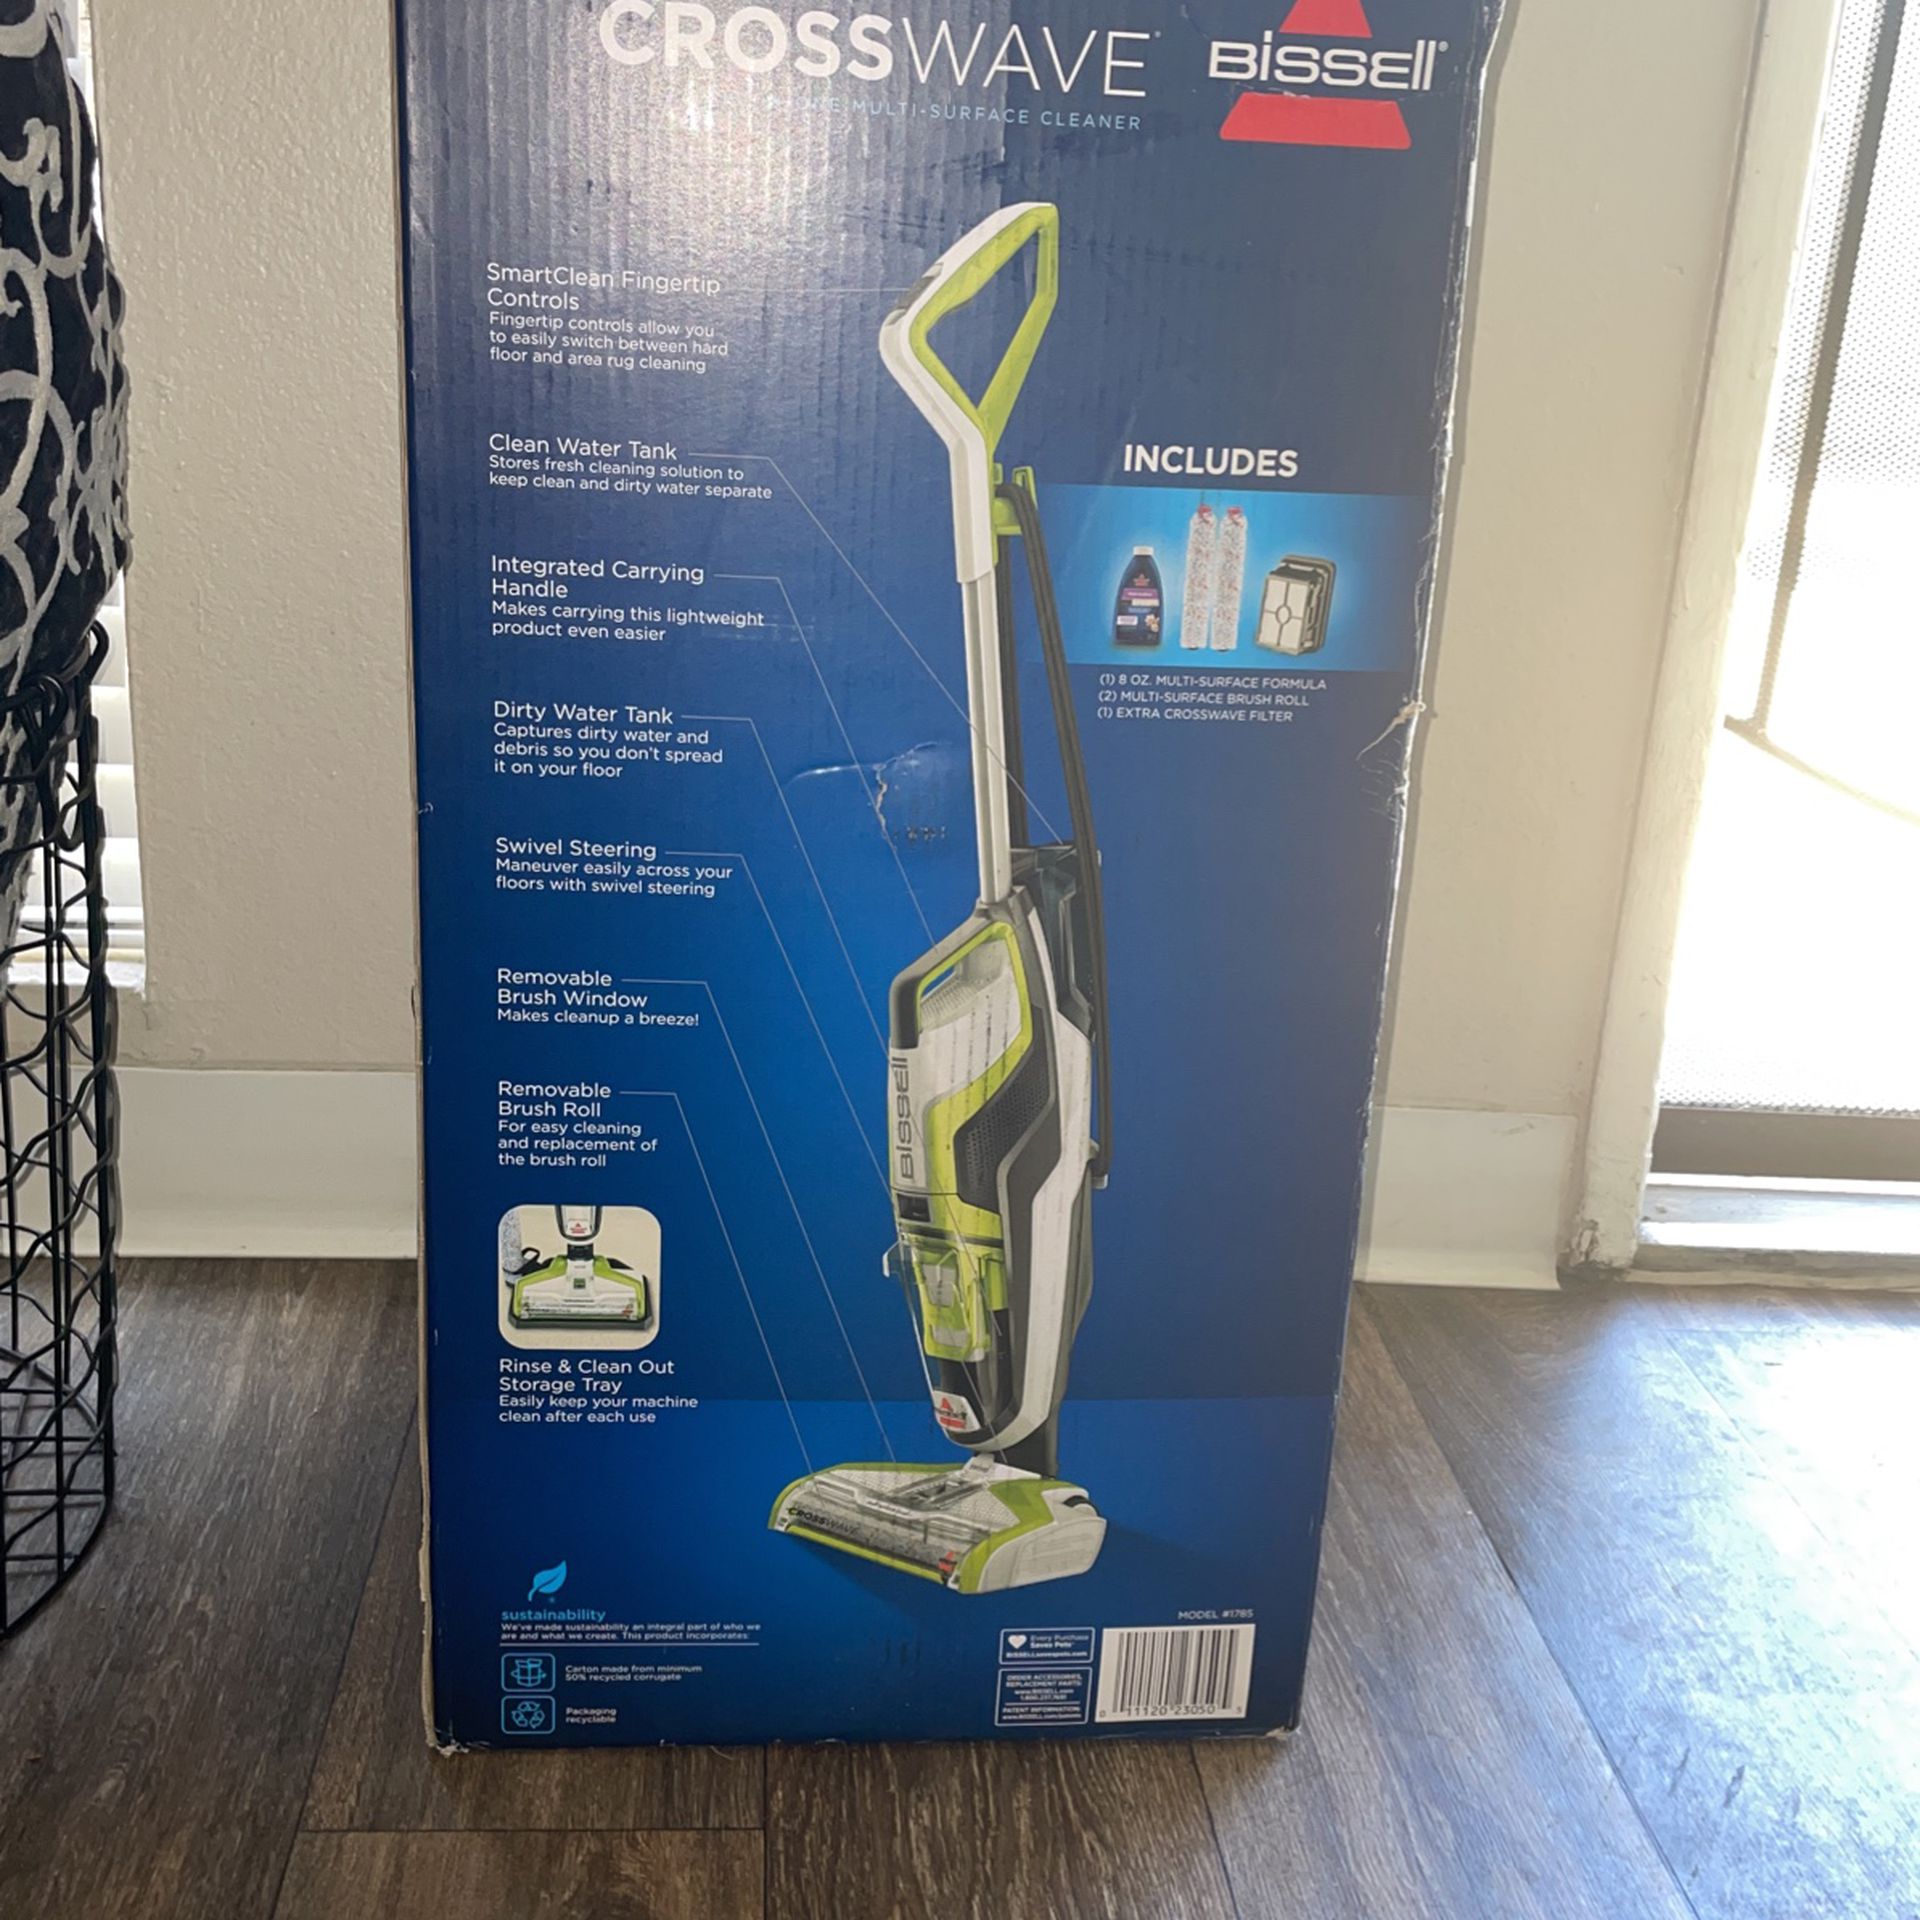 Brand New Cross Wave “bissell” Never Opened 